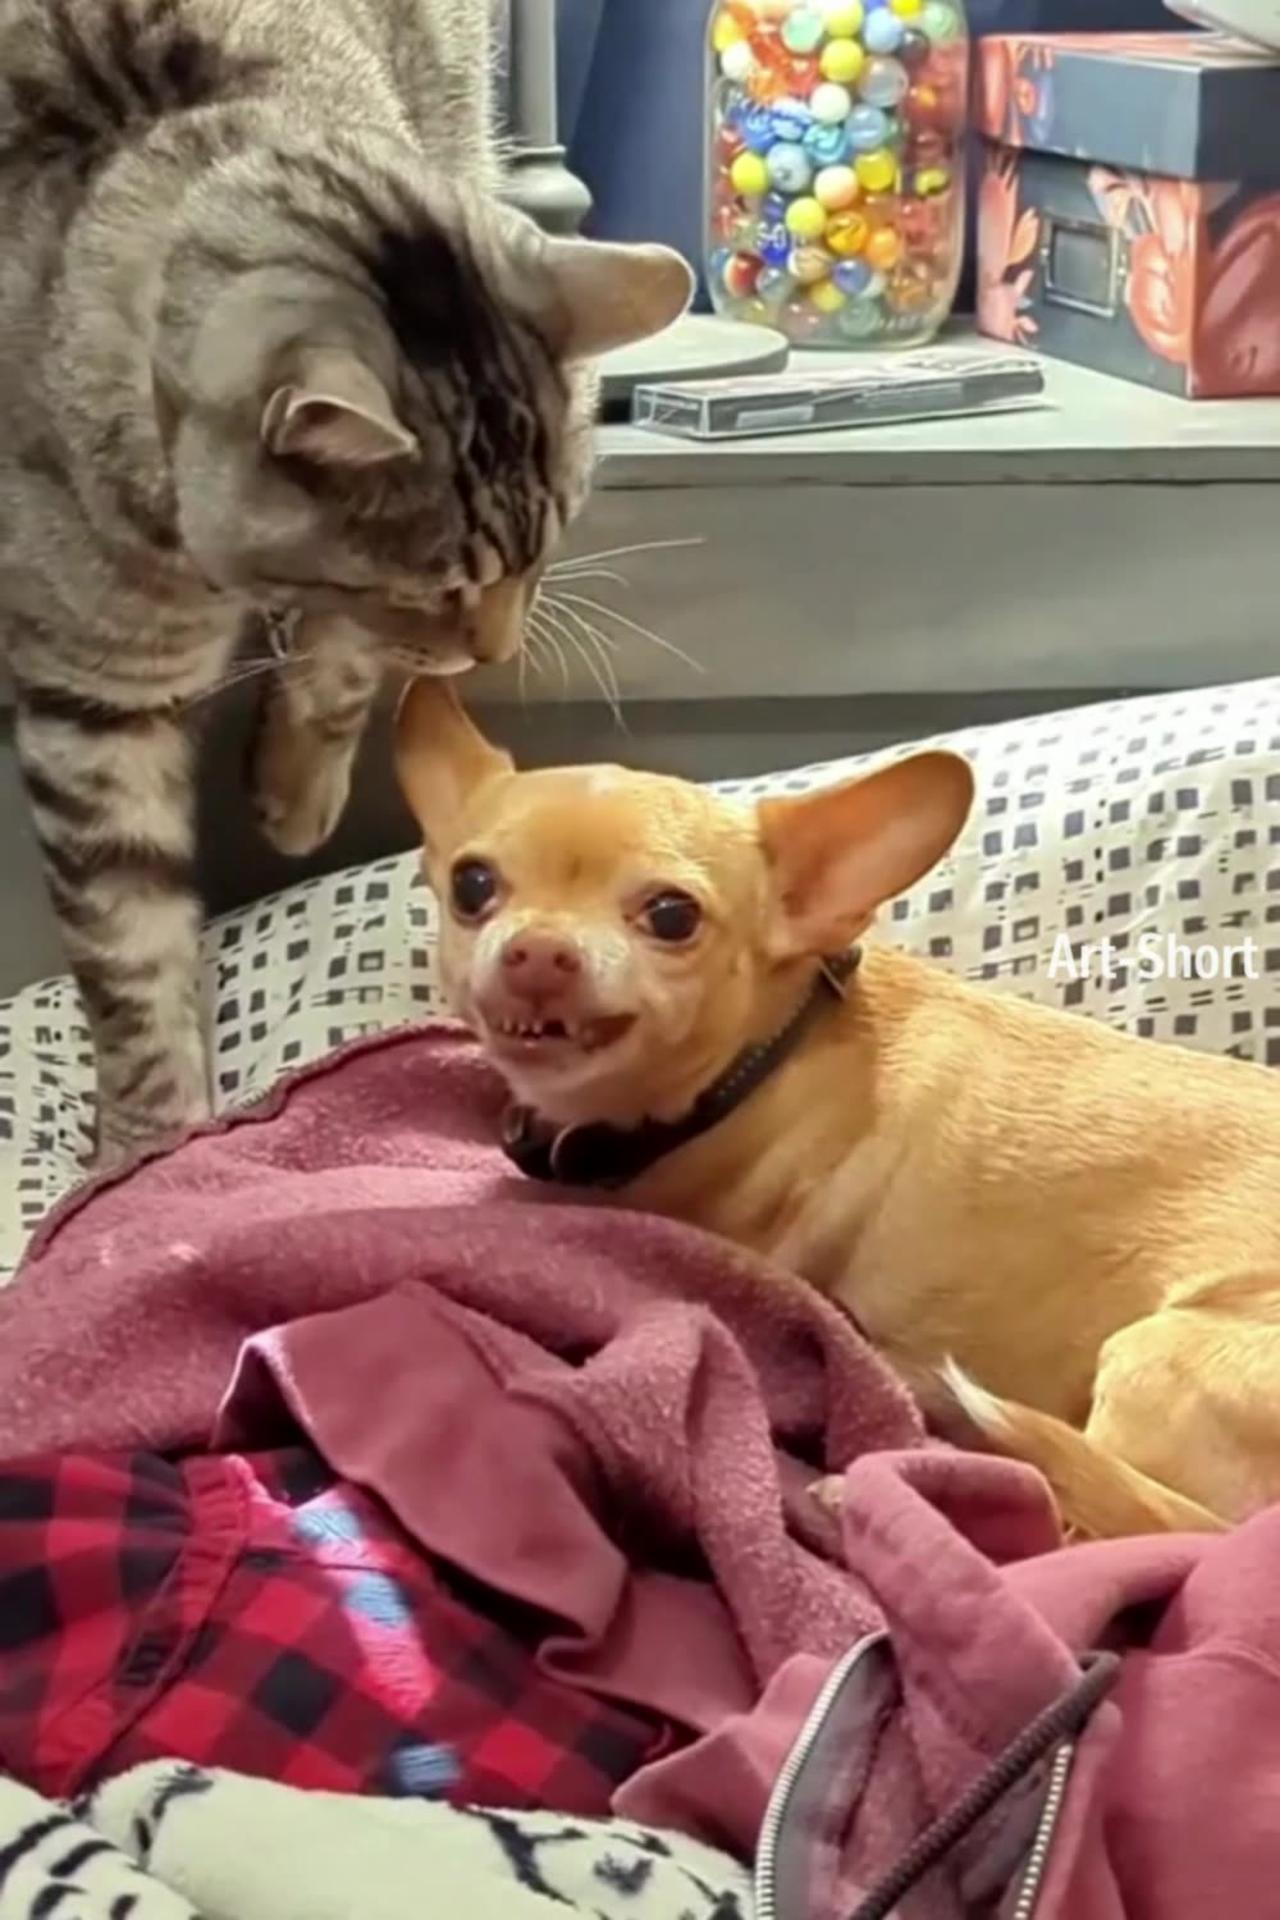 A small dog preys on an older cat